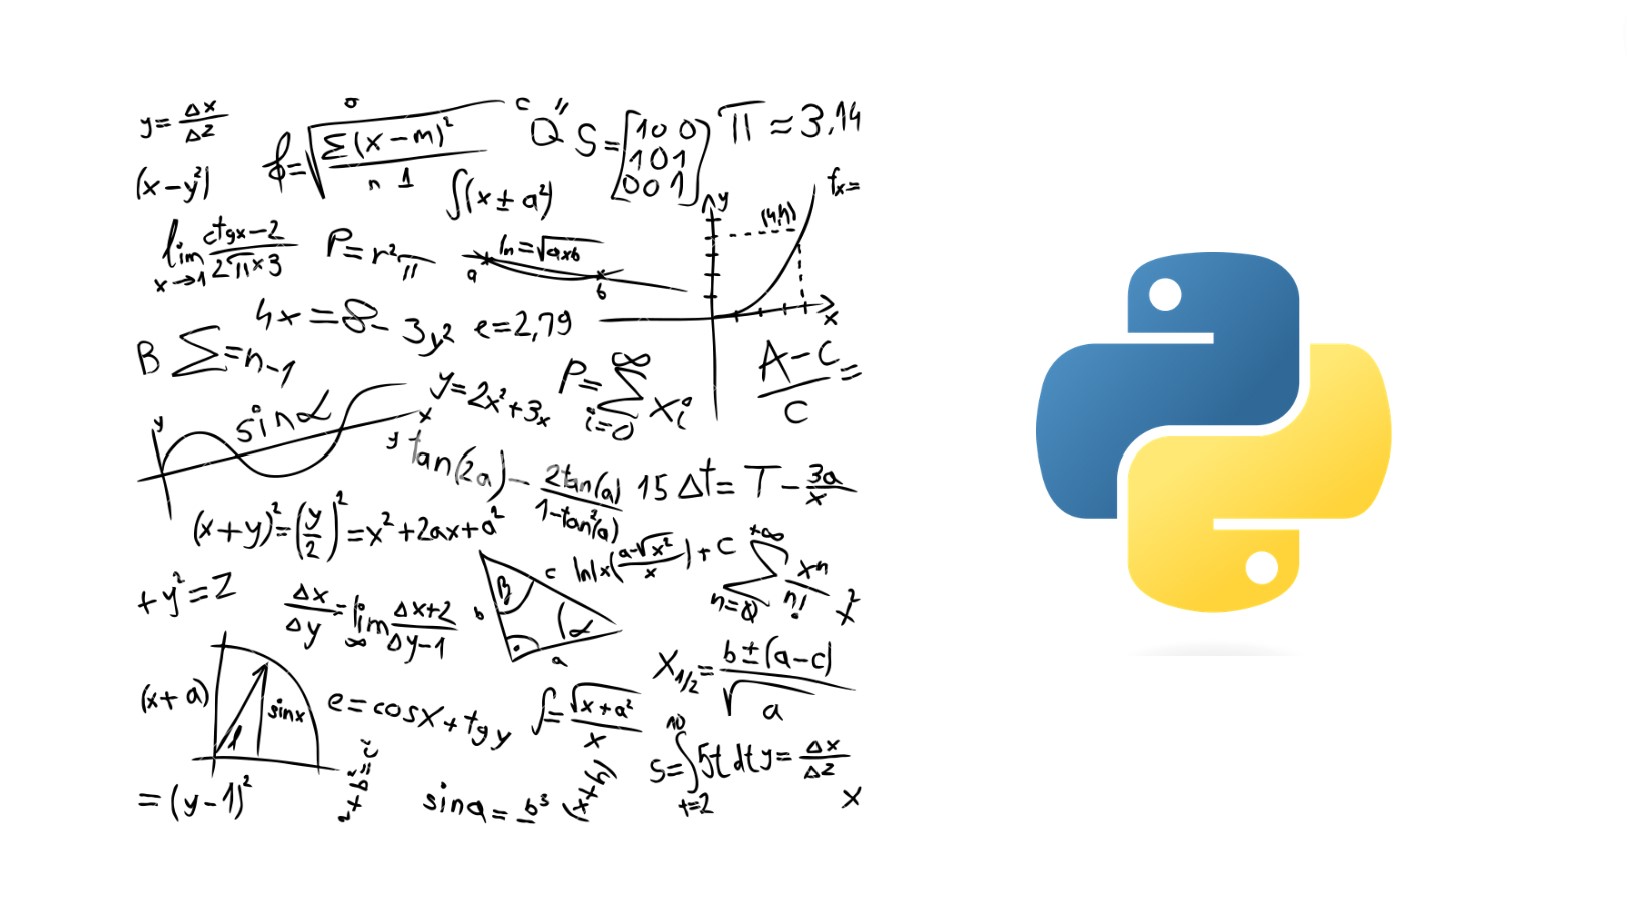 We have a white background with a set of calculus equations, derivatives, and graphs of equations on the left and on the right, we have the logo of the Python language (which consists of a blue cartoon snake looking to the left sitting on top of an upside down yellow cartoon snake looking to the right in such a way that they form a makeshift plus sign).